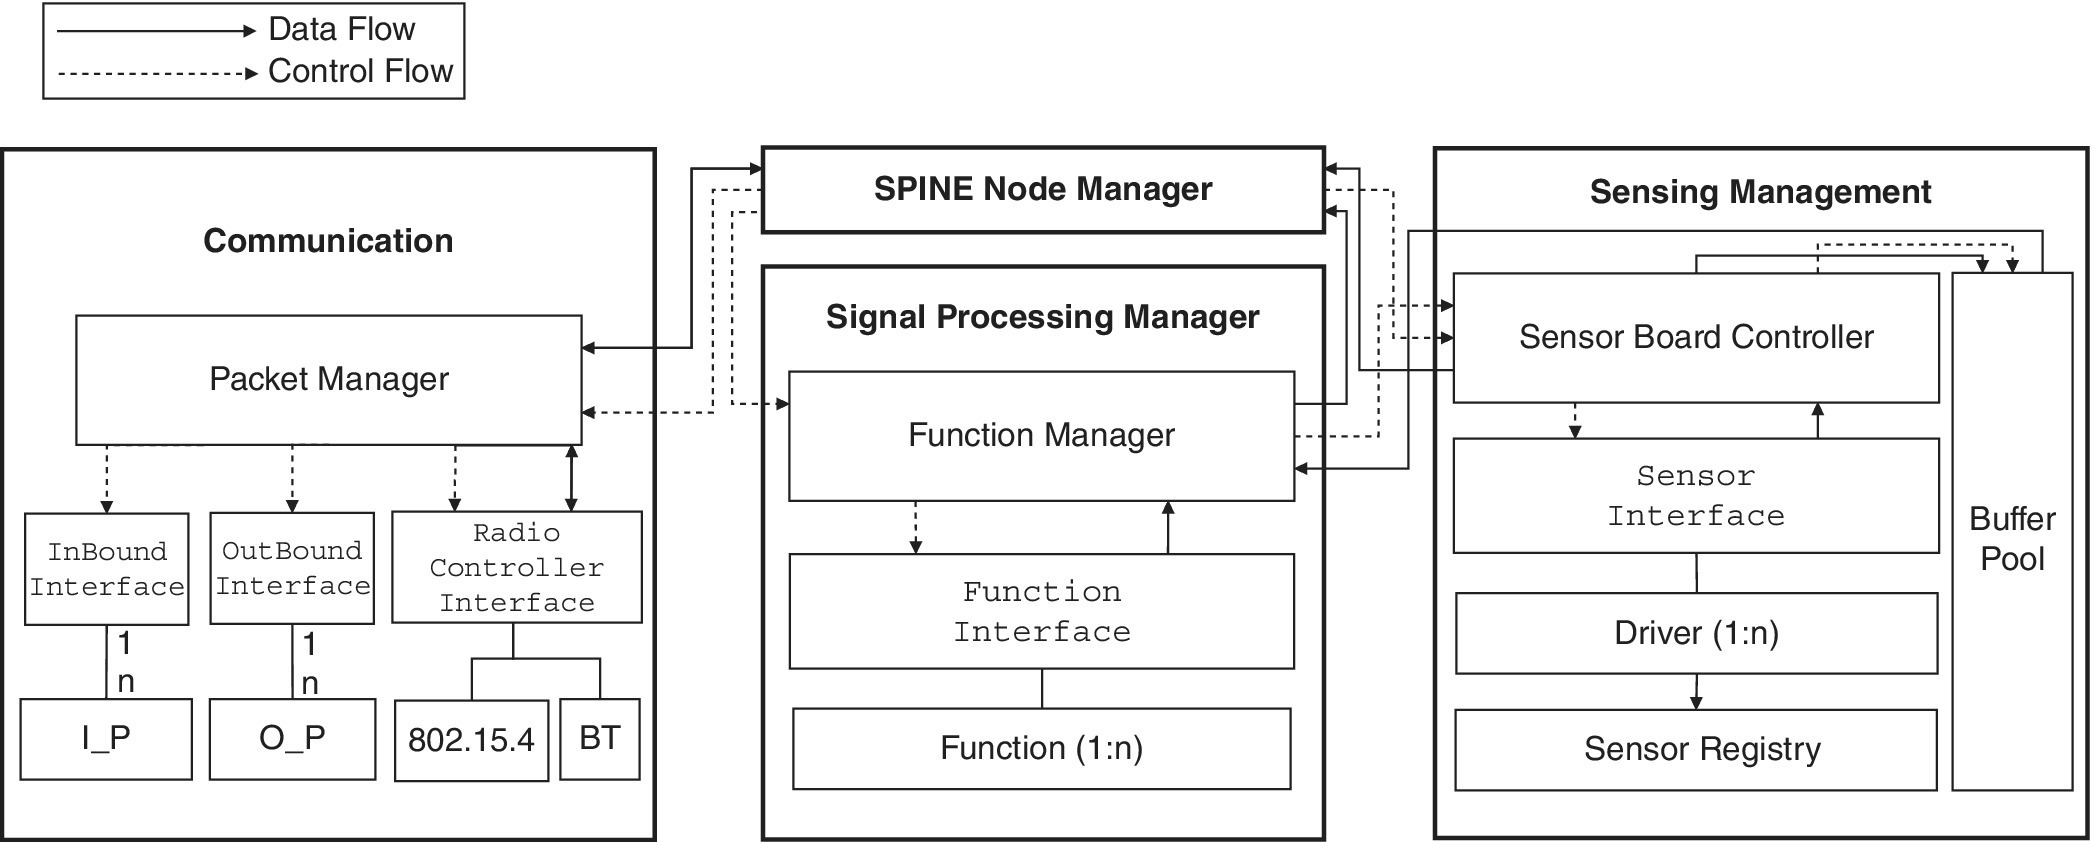 Diagram of SPINE Node software architecture with boxes labeled Communication, SPINE Node Manager, Signal Processing Manager, and Sensing Management linked by solid (data flow) and dashed (control flow) arrows.